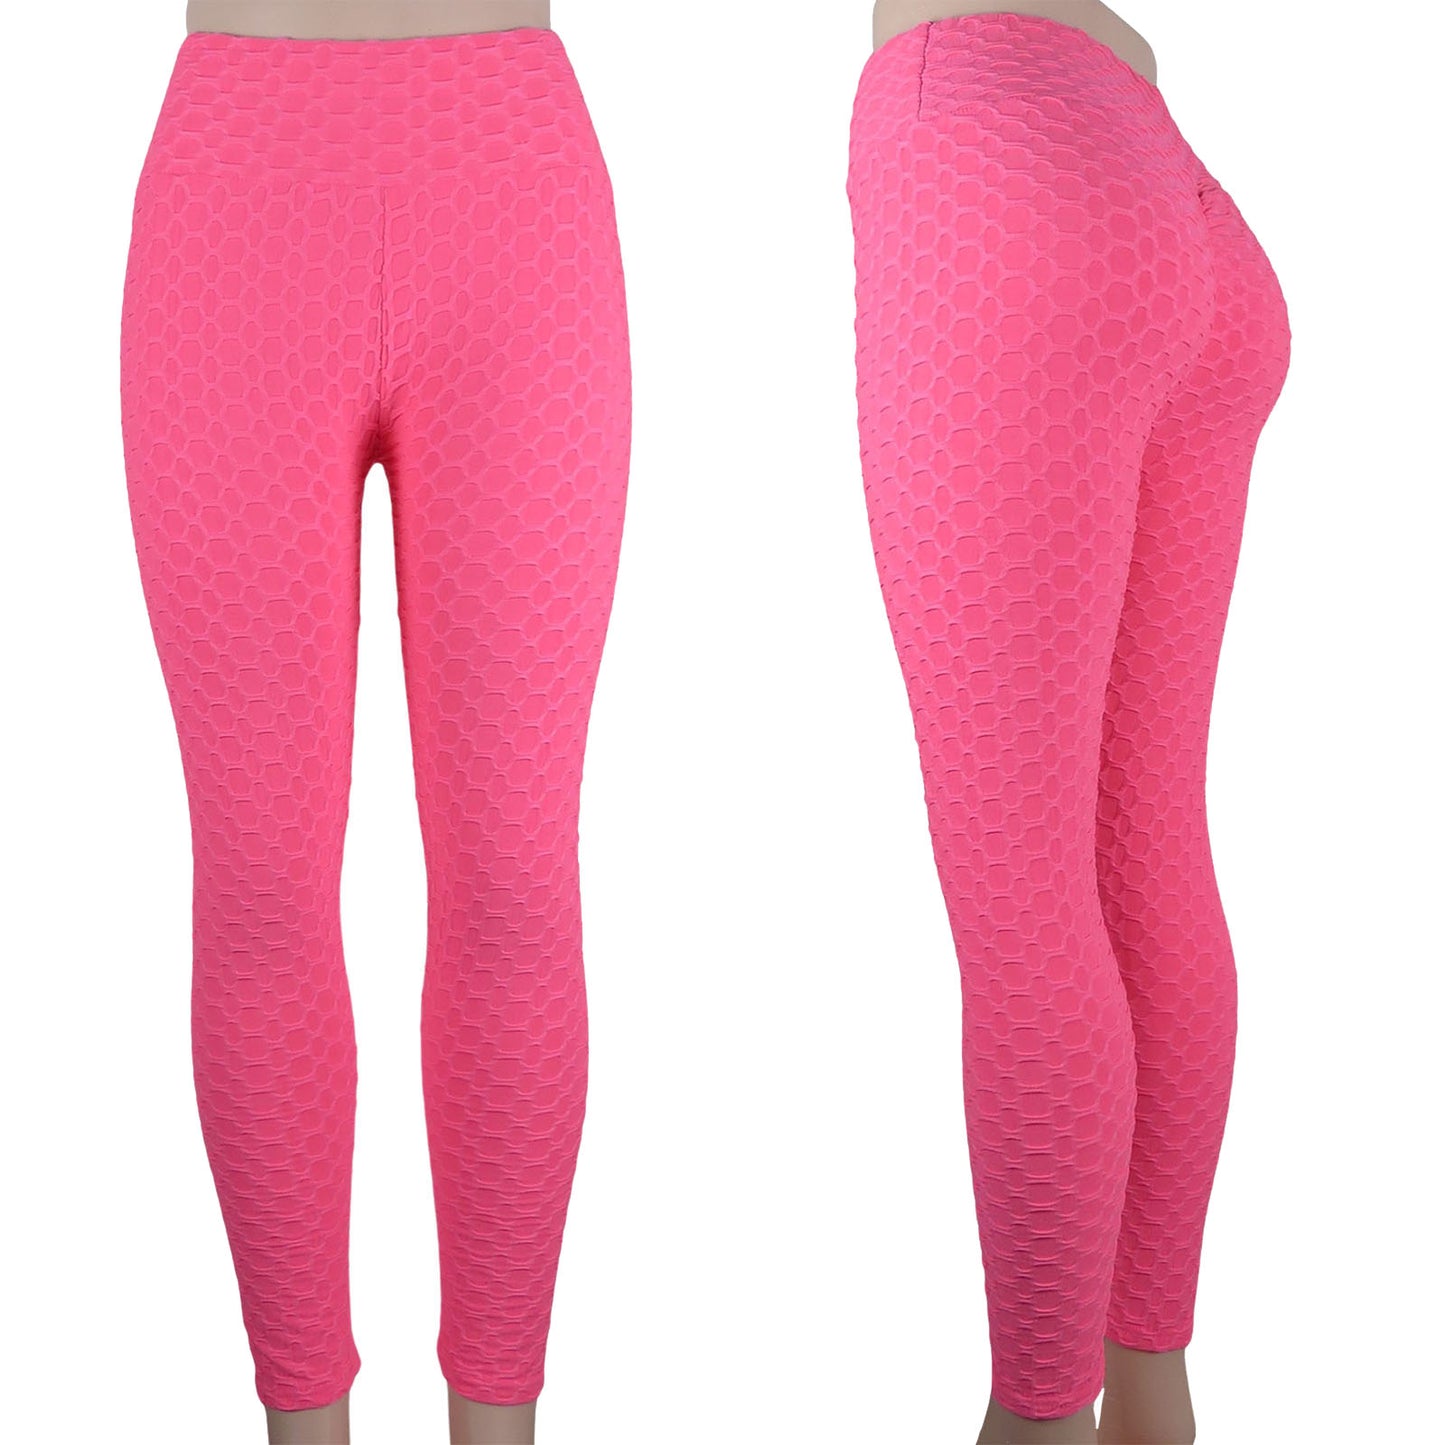 Wholesale bubble pattern tiktok leggings with a high waist and anti cellulite scrunch butt compression in pink